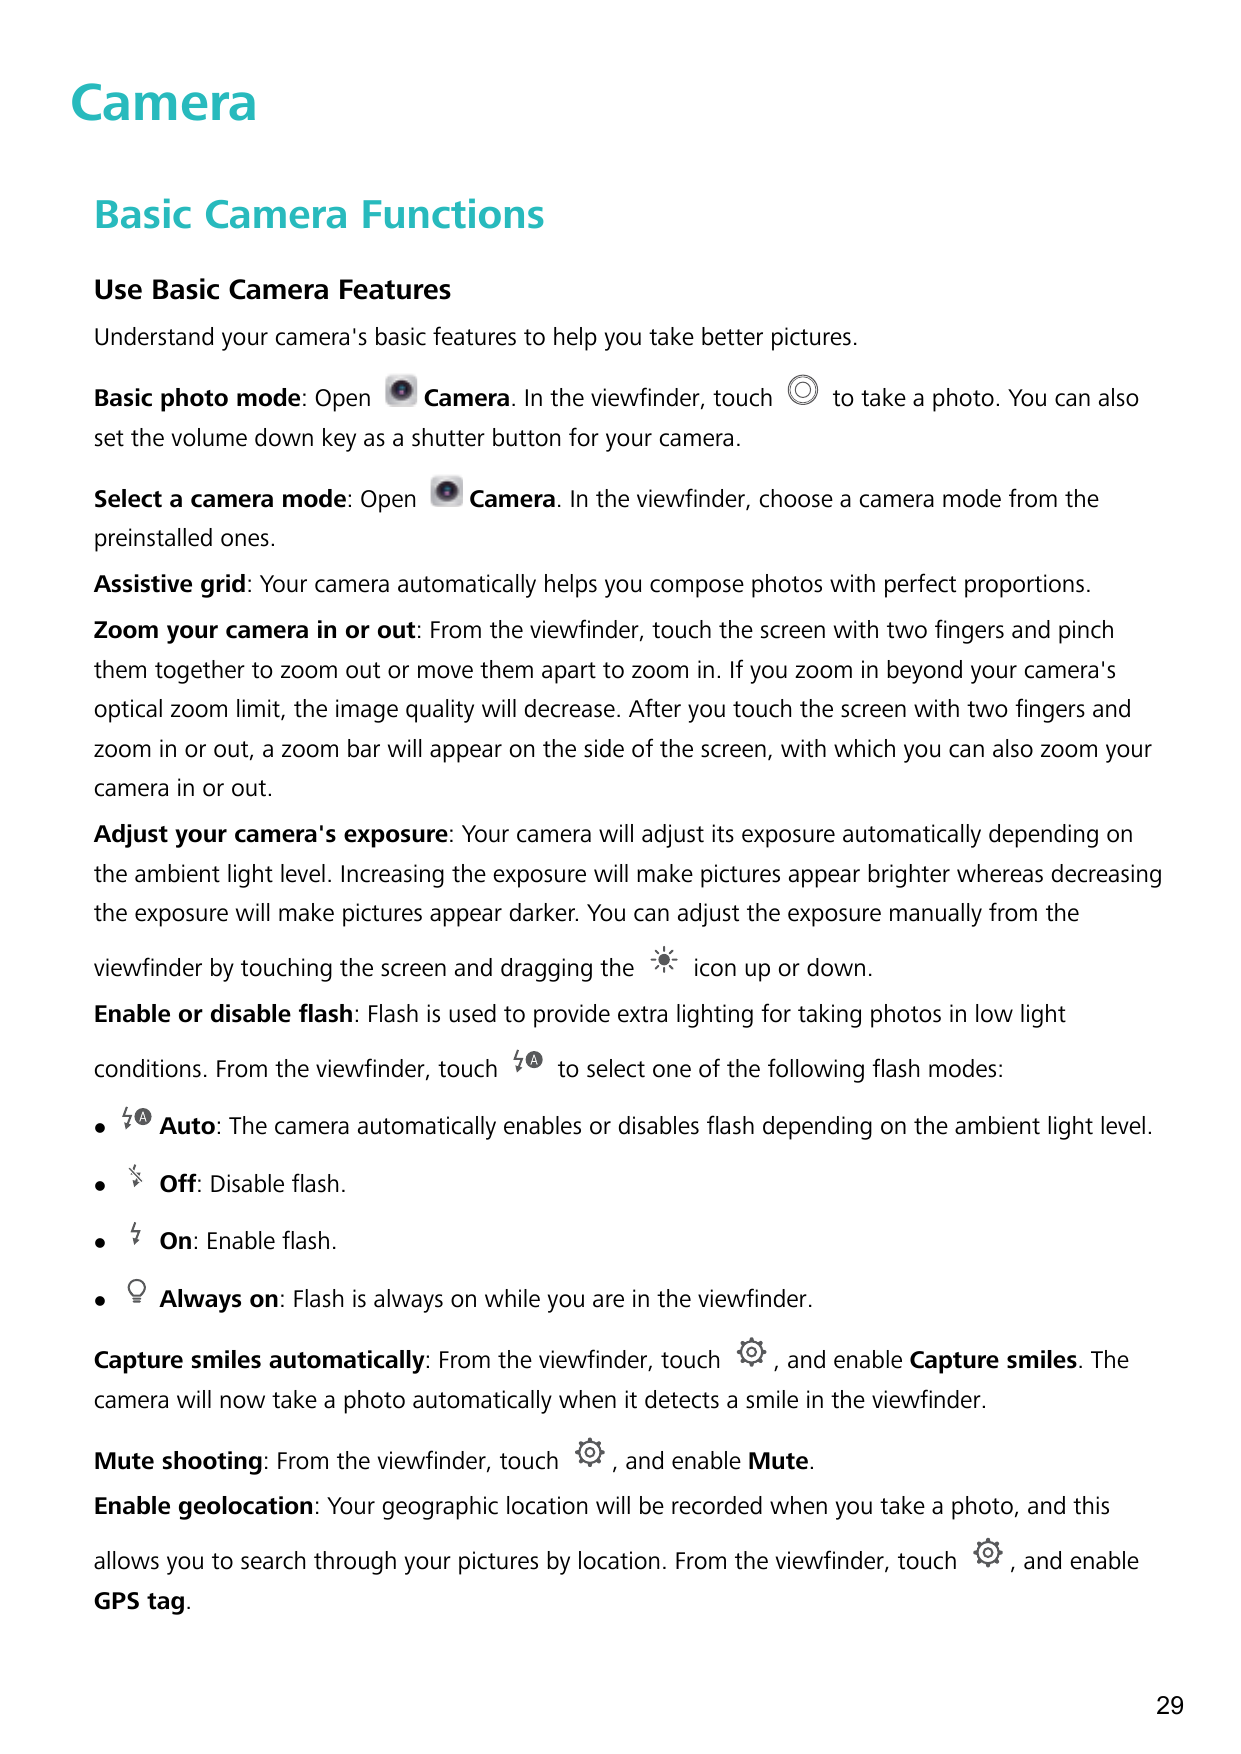 CameraBasic Camera FunctionsUse Basic Camera FeaturesUnderstand your camera's basic features to help you take better pictures.Ba